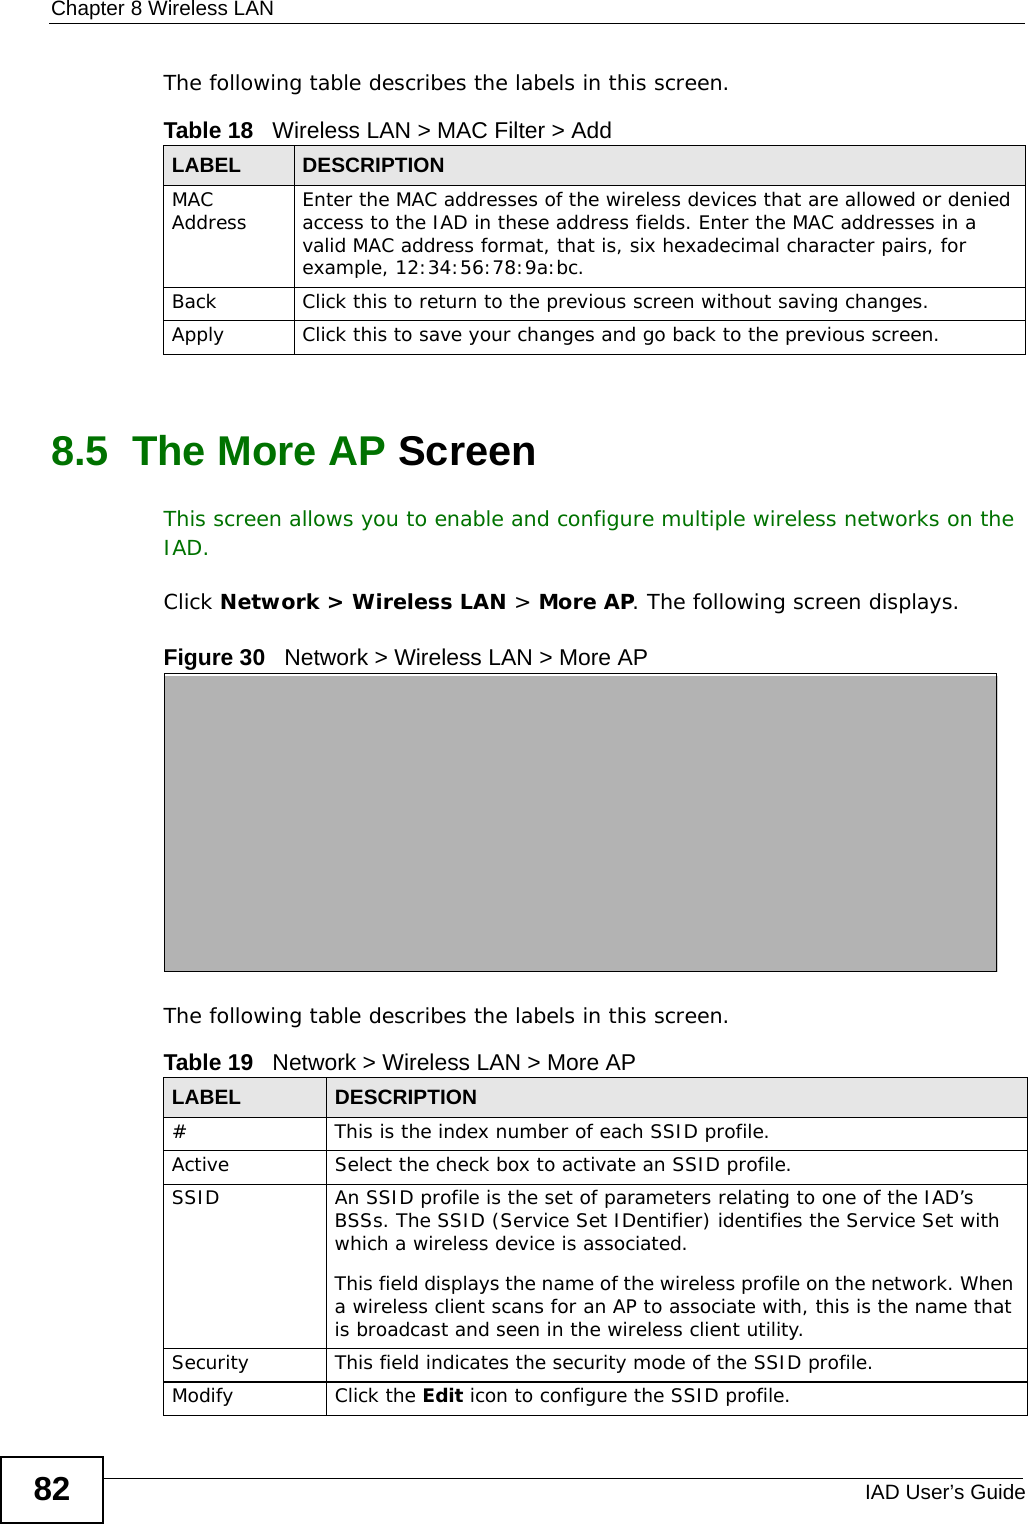 Chapter 8 Wireless LANIAD User’s Guide82The following table describes the labels in this screen.8.5  The More AP Screen This screen allows you to enable and configure multiple wireless networks on the IAD.Click Network &gt; Wireless LAN &gt; More AP. The following screen displays.Figure 30   Network &gt; Wireless LAN &gt; More APThe following table describes the labels in this screen.Table 18   Wireless LAN &gt; MAC Filter &gt; AddLABEL DESCRIPTIONMAC Address Enter the MAC addresses of the wireless devices that are allowed or denied access to the IAD in these address fields. Enter the MAC addresses in a valid MAC address format, that is, six hexadecimal character pairs, for example, 12:34:56:78:9a:bc.Back Click this to return to the previous screen without saving changes.Apply Click this to save your changes and go back to the previous screen.Table 19   Network &gt; Wireless LAN &gt; More APLABEL DESCRIPTION# This is the index number of each SSID profile. Active Select the check box to activate an SSID profile.SSID An SSID profile is the set of parameters relating to one of the IAD’s BSSs. The SSID (Service Set IDentifier) identifies the Service Set with which a wireless device is associated. This field displays the name of the wireless profile on the network. When a wireless client scans for an AP to associate with, this is the name that is broadcast and seen in the wireless client utility.Security This field indicates the security mode of the SSID profile.Modify Click the Edit icon to configure the SSID profile.